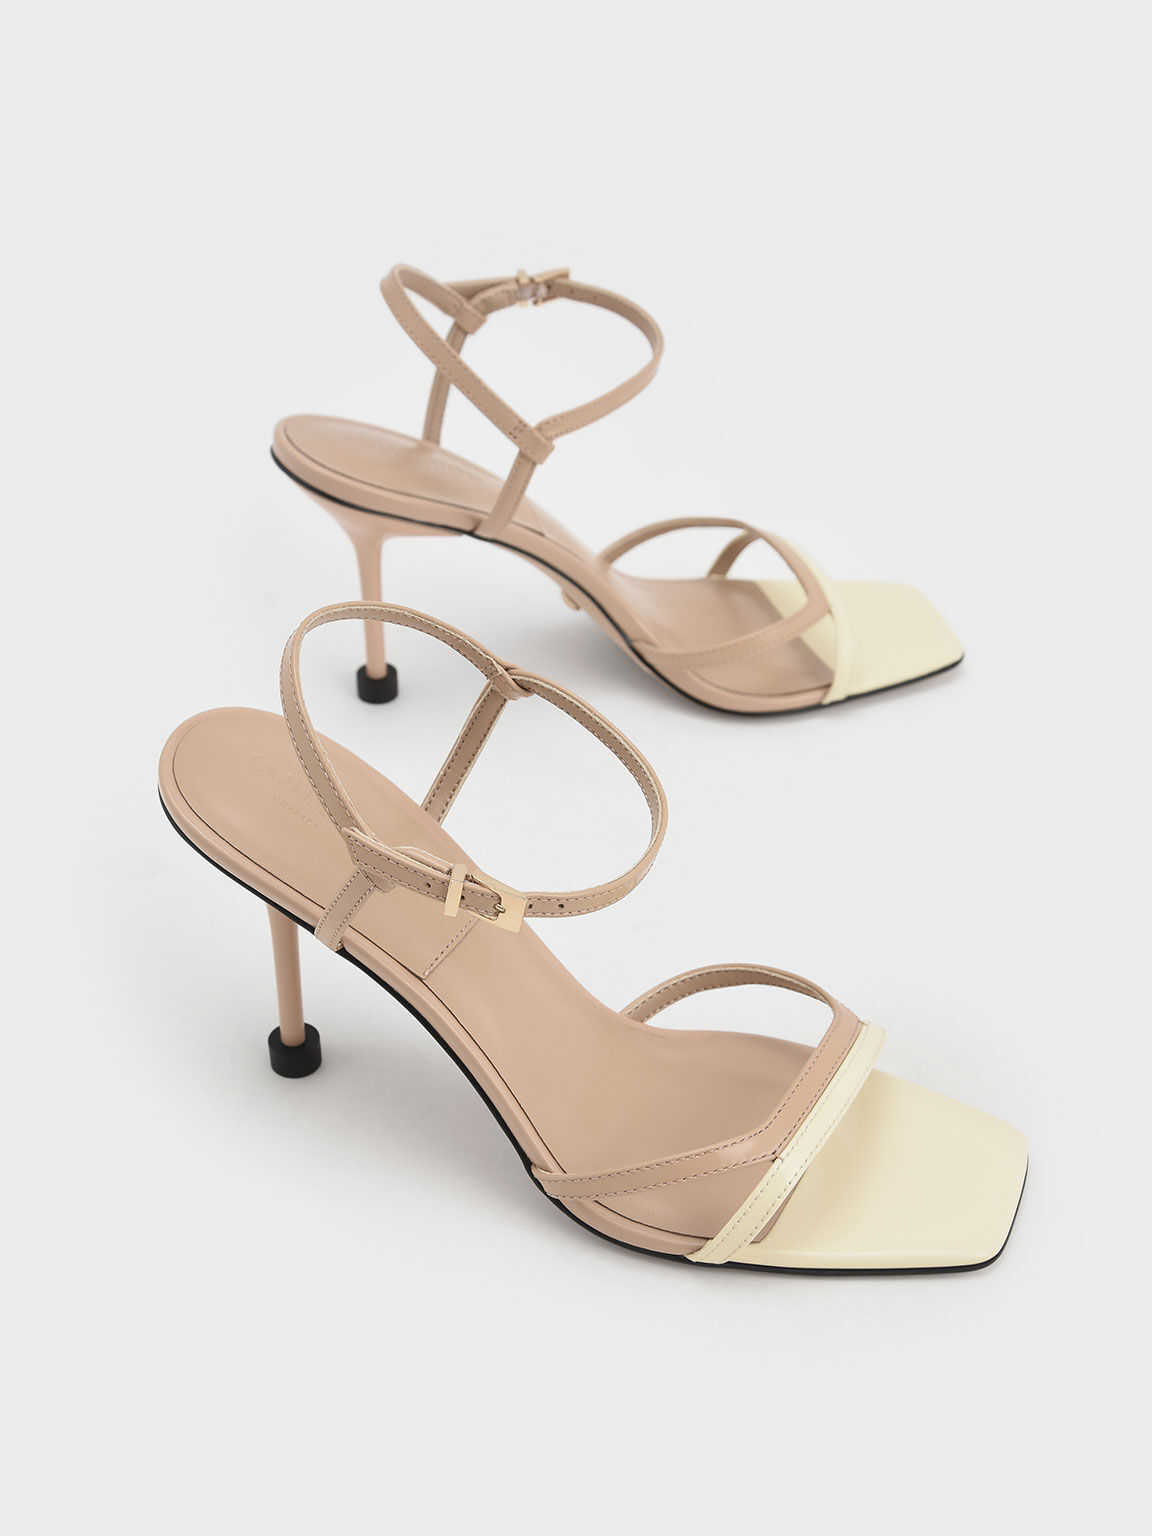 Patent Leather Ankle-Strap Stiletto Sandals, Nude, hi-res